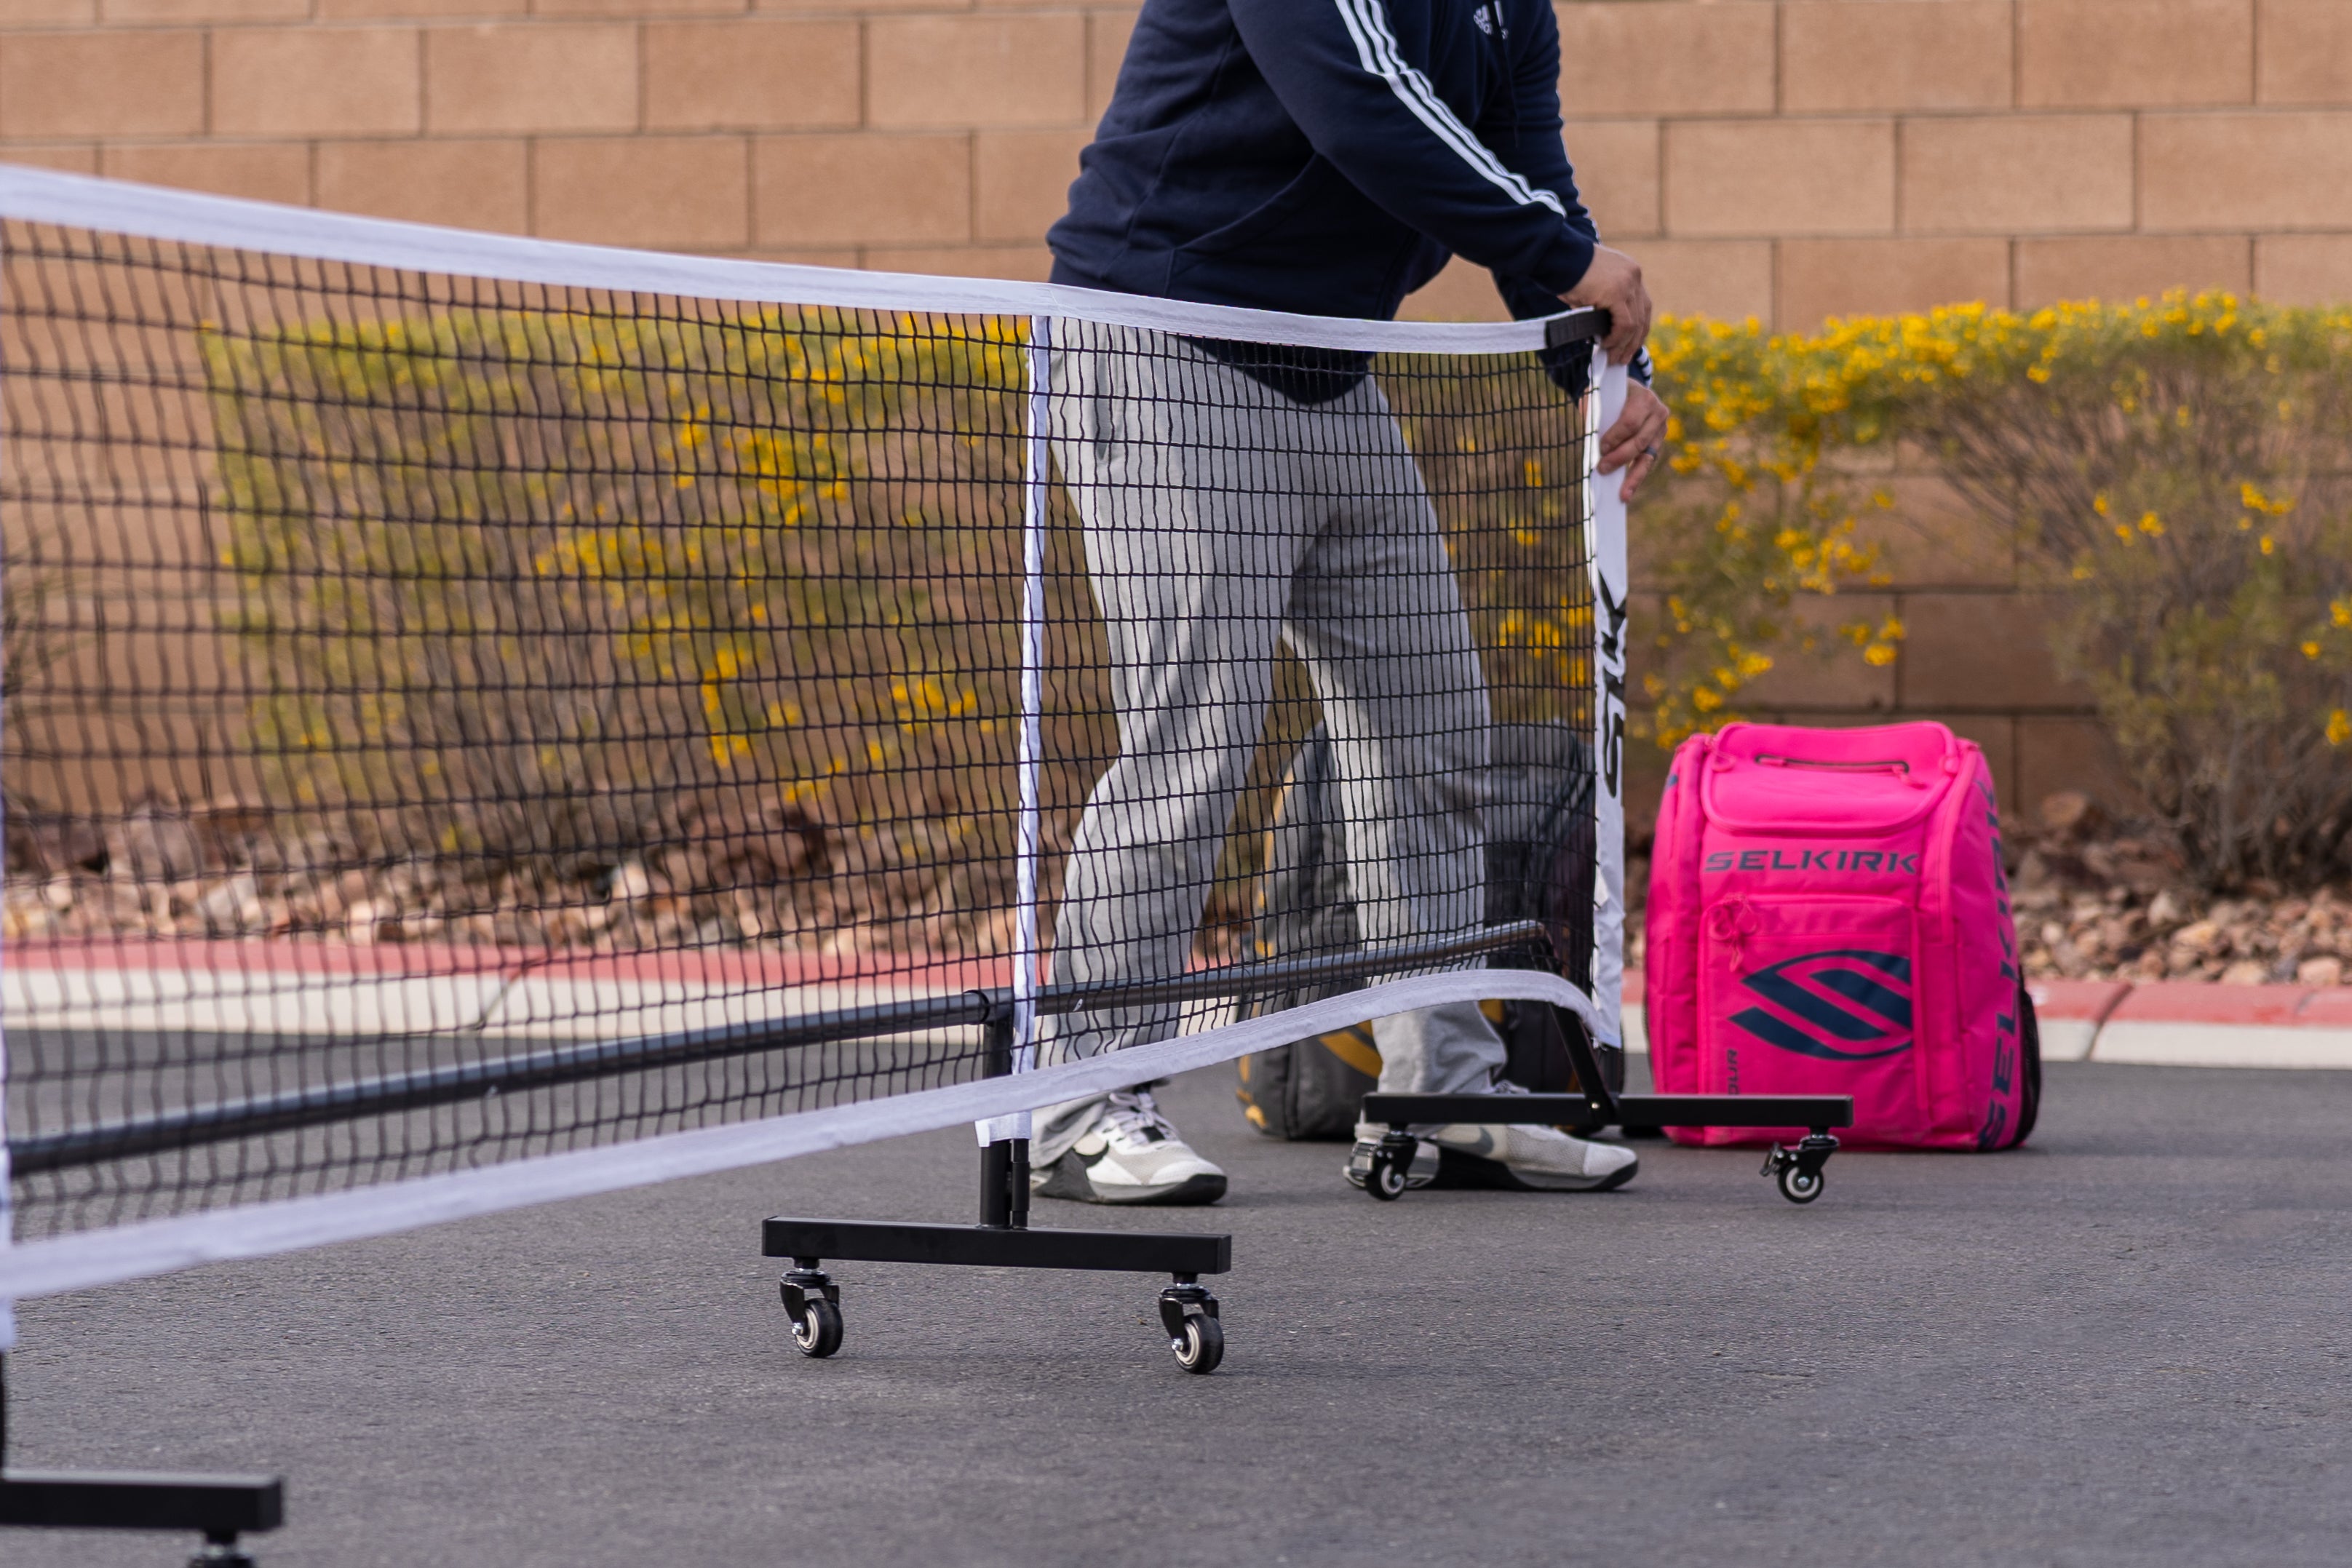 Portable pickleball nets allow you to play the game anywhere.